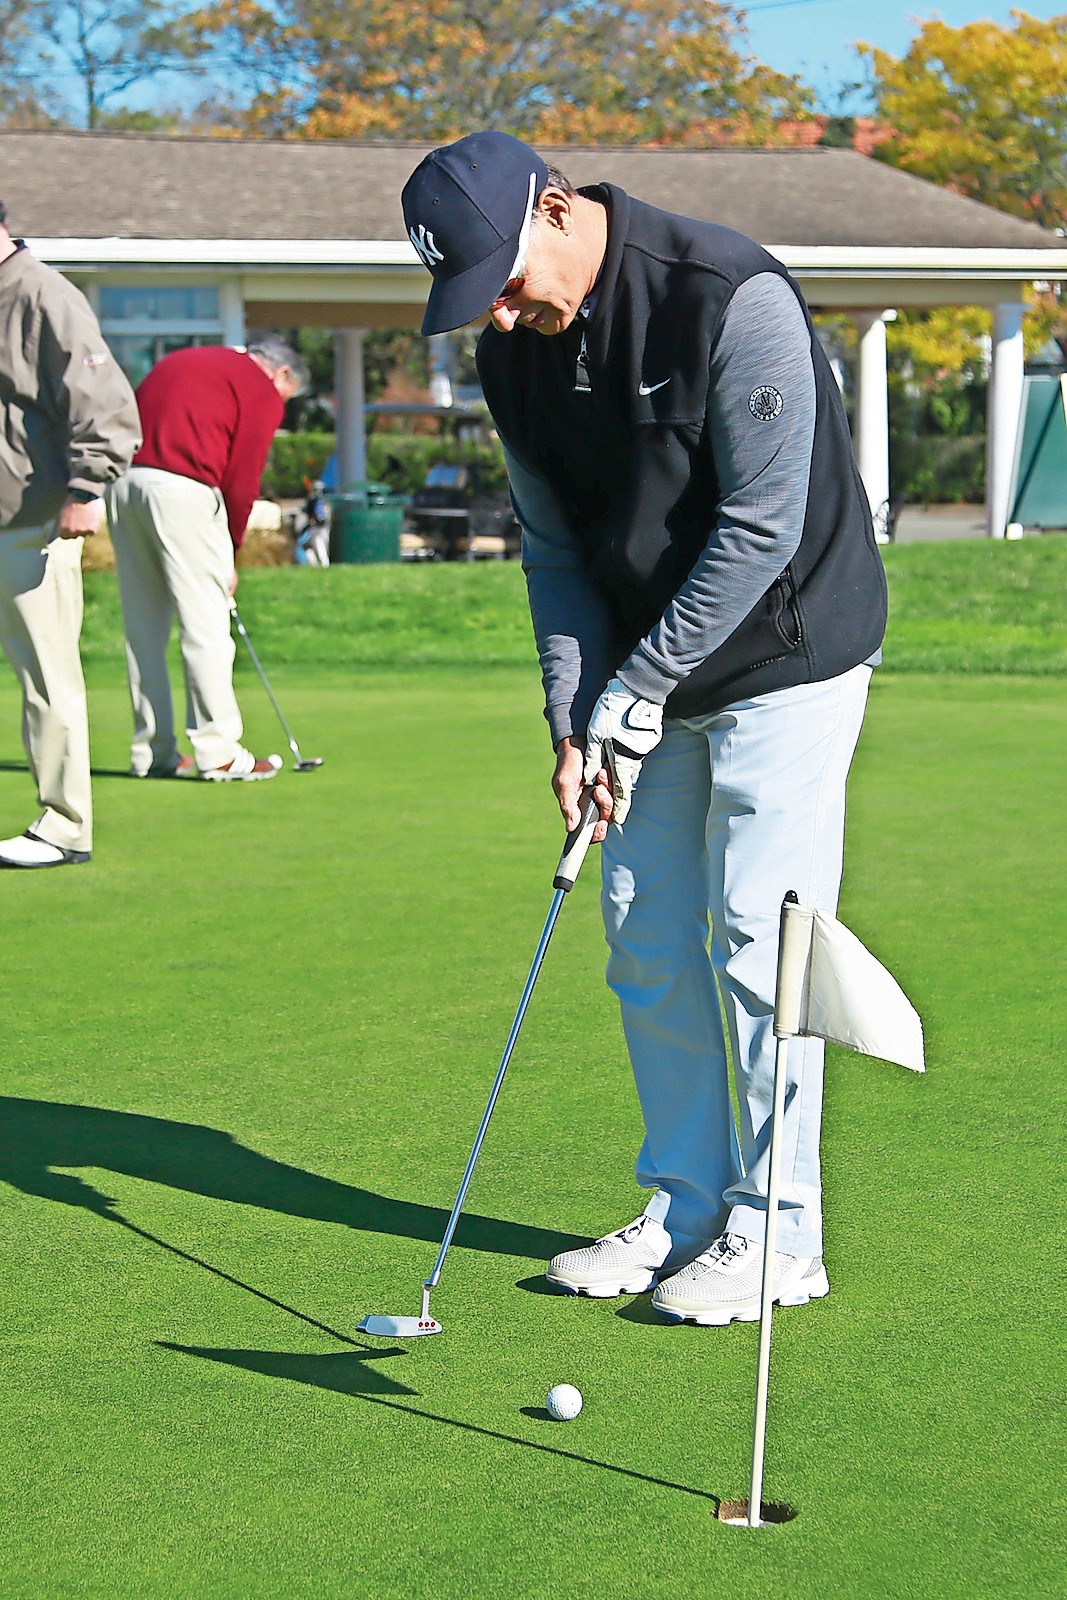 Malverne resident Jim Papazis of Malverne practiced his putting prior to the golf tournament on Oct. 31.